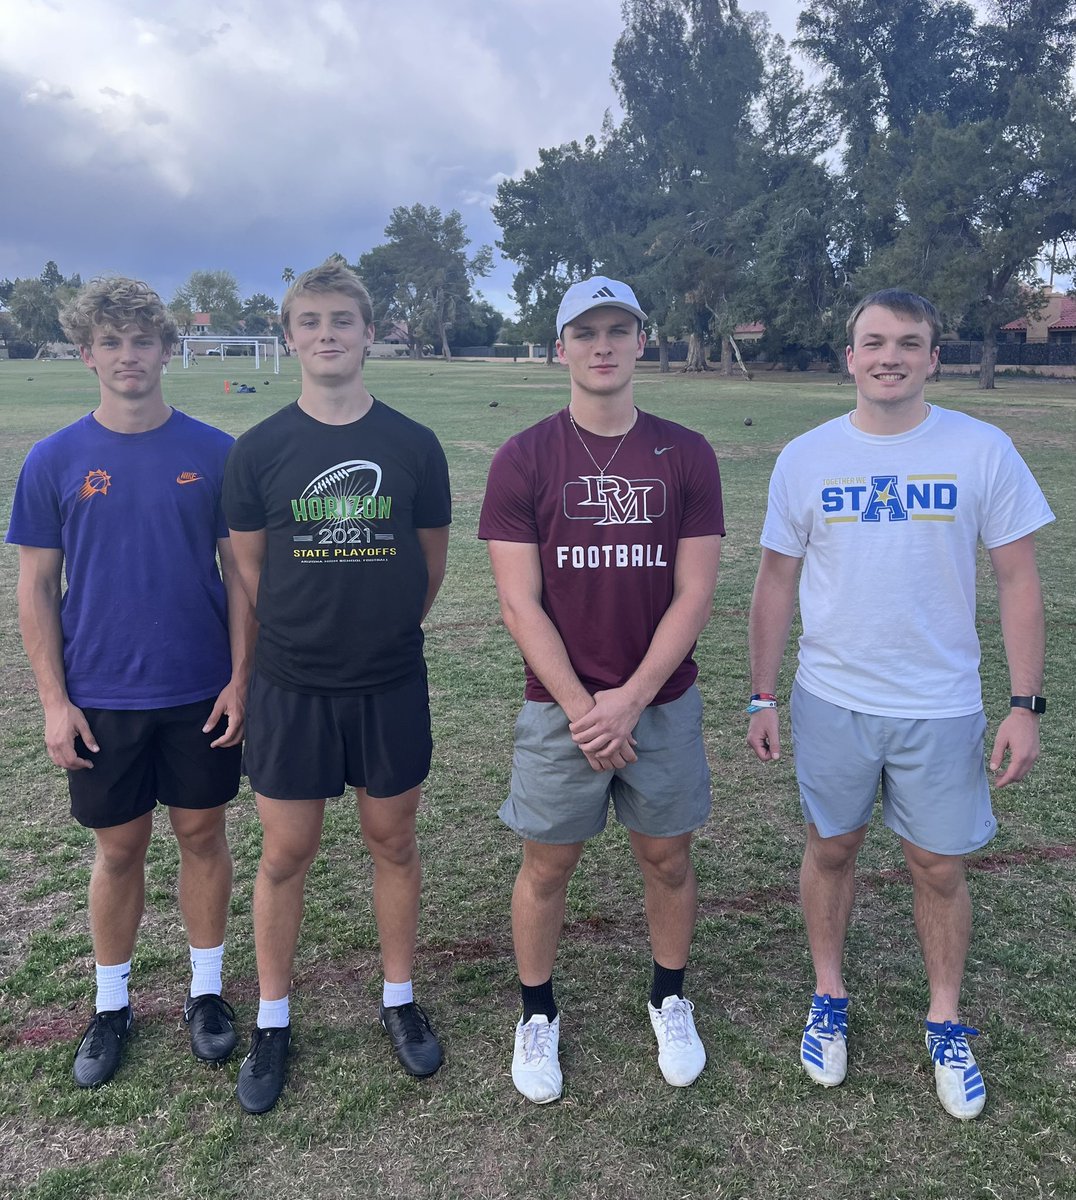 🚨Battle of the Brothers🚨 • Round 1: Stanfords vs Floyd’s • Winners: Stanford Bros 🏆 • L to R: @FloydKanyon @Ryker_Floyd @TylerStanford25 @SStanford2022 Great job fellas, puntings a family thing 💪 #rauschkicking